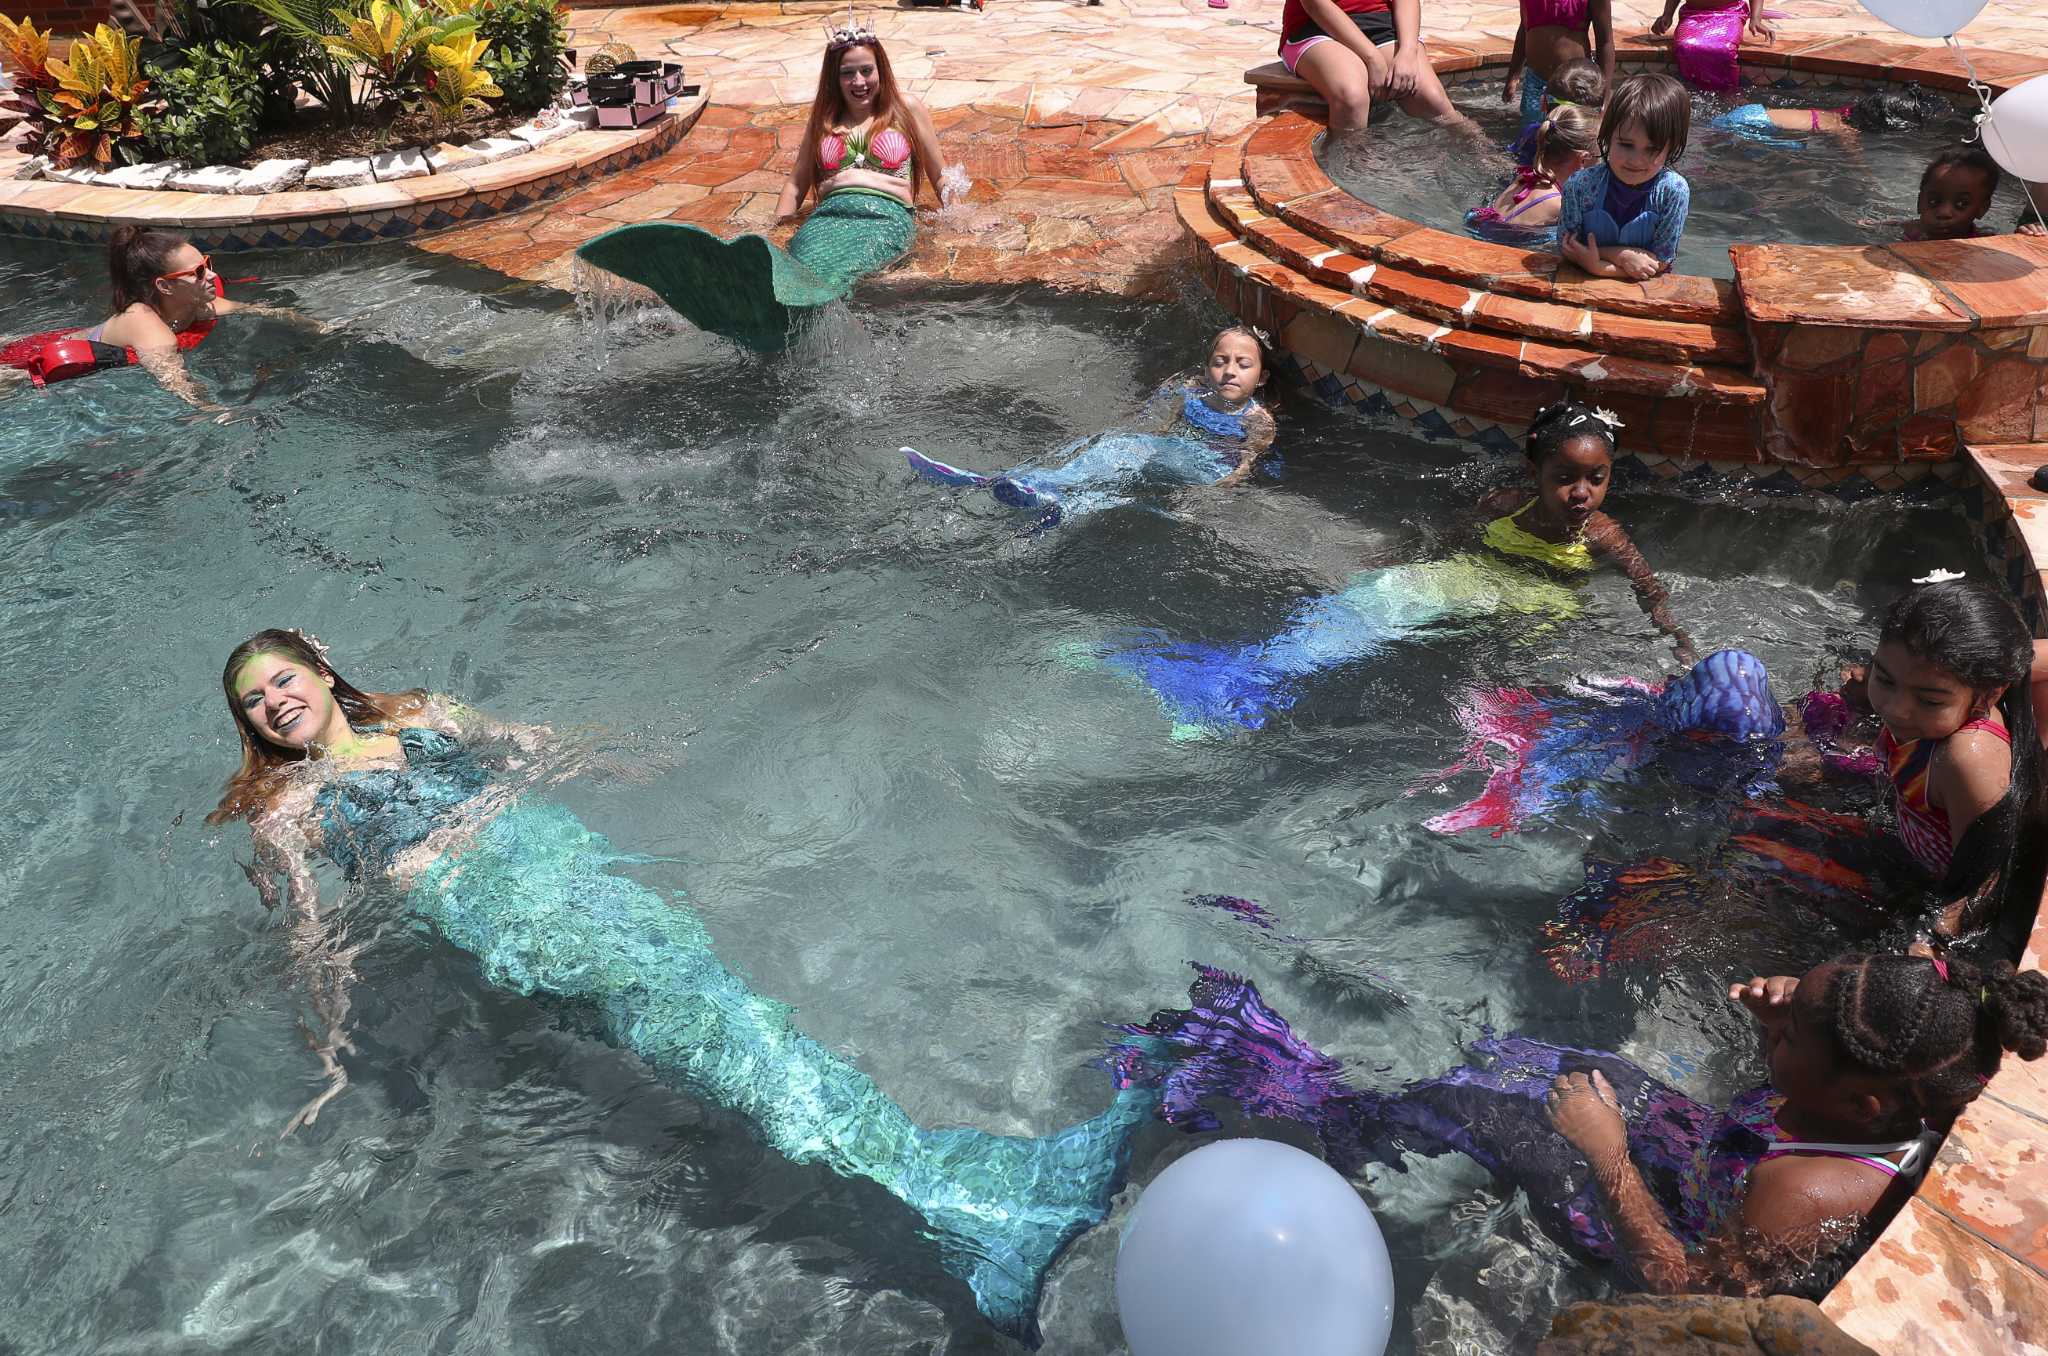 There's a new mermaid business in Houston and it's absolutely adorable - Houston Chronicle2048 x 1356